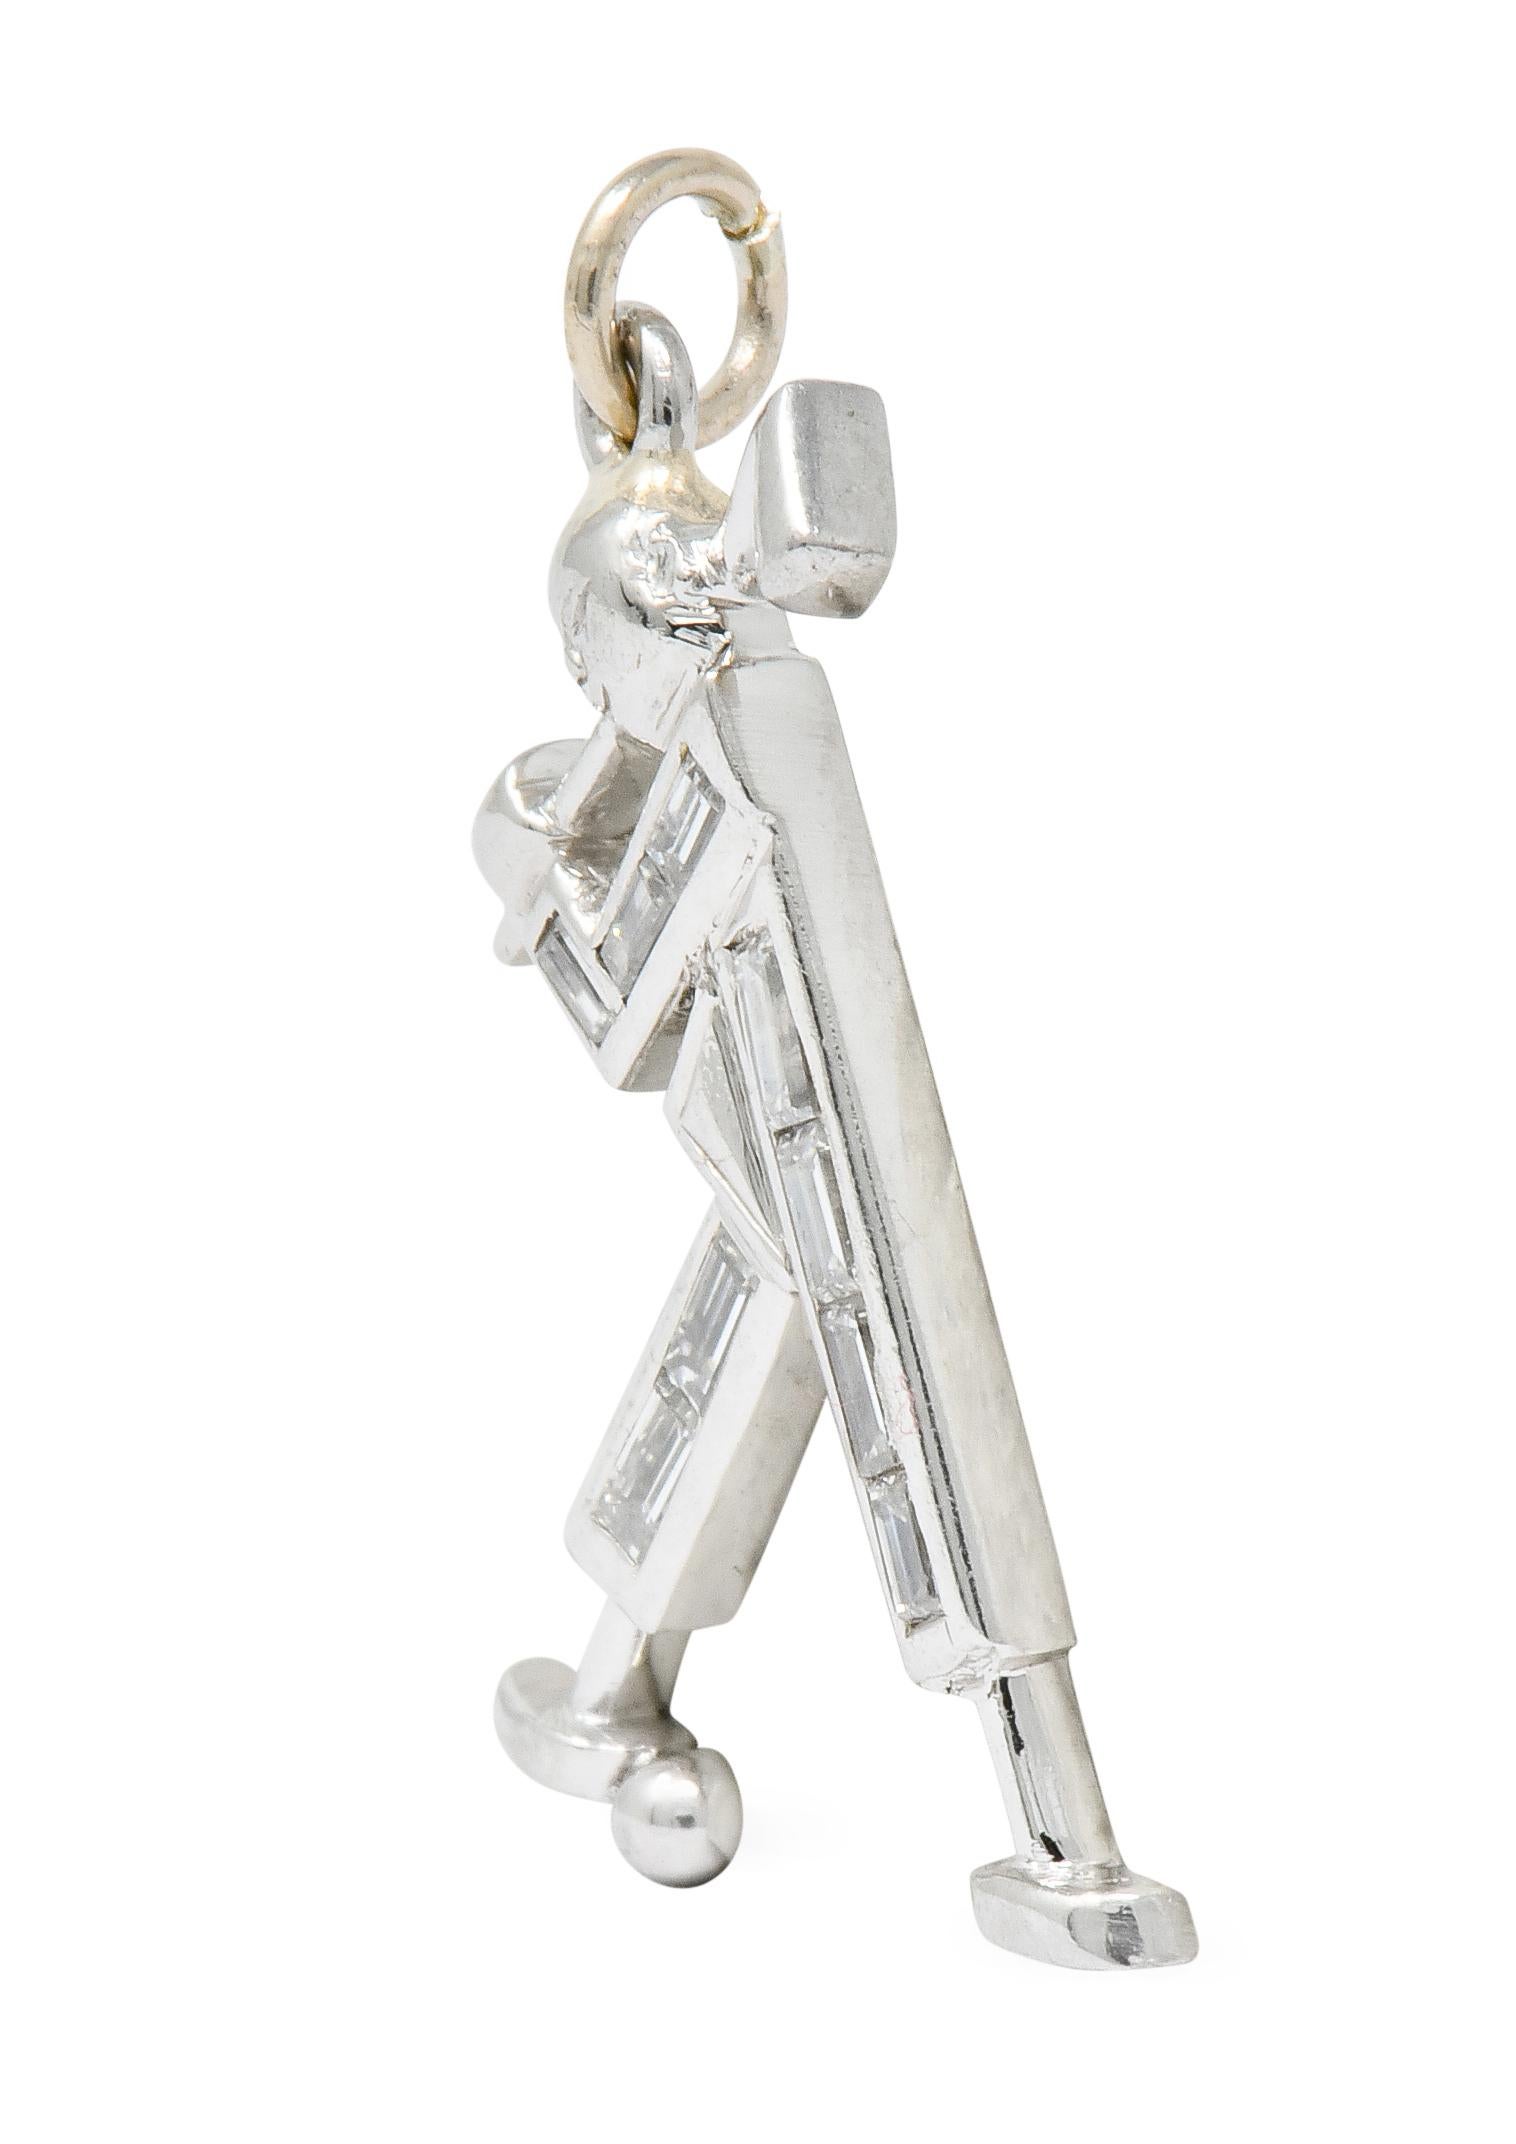 Charm designed as a stylized golfer, mid-swing

Limbs are comprised of bezel set baguette cut diamonds weighing approximately 0.50 carat total; eye-clean and white

Completed by jump ring bale

Tested as platinum

Circa: 1990s

Measures: 1/2 x 7/8